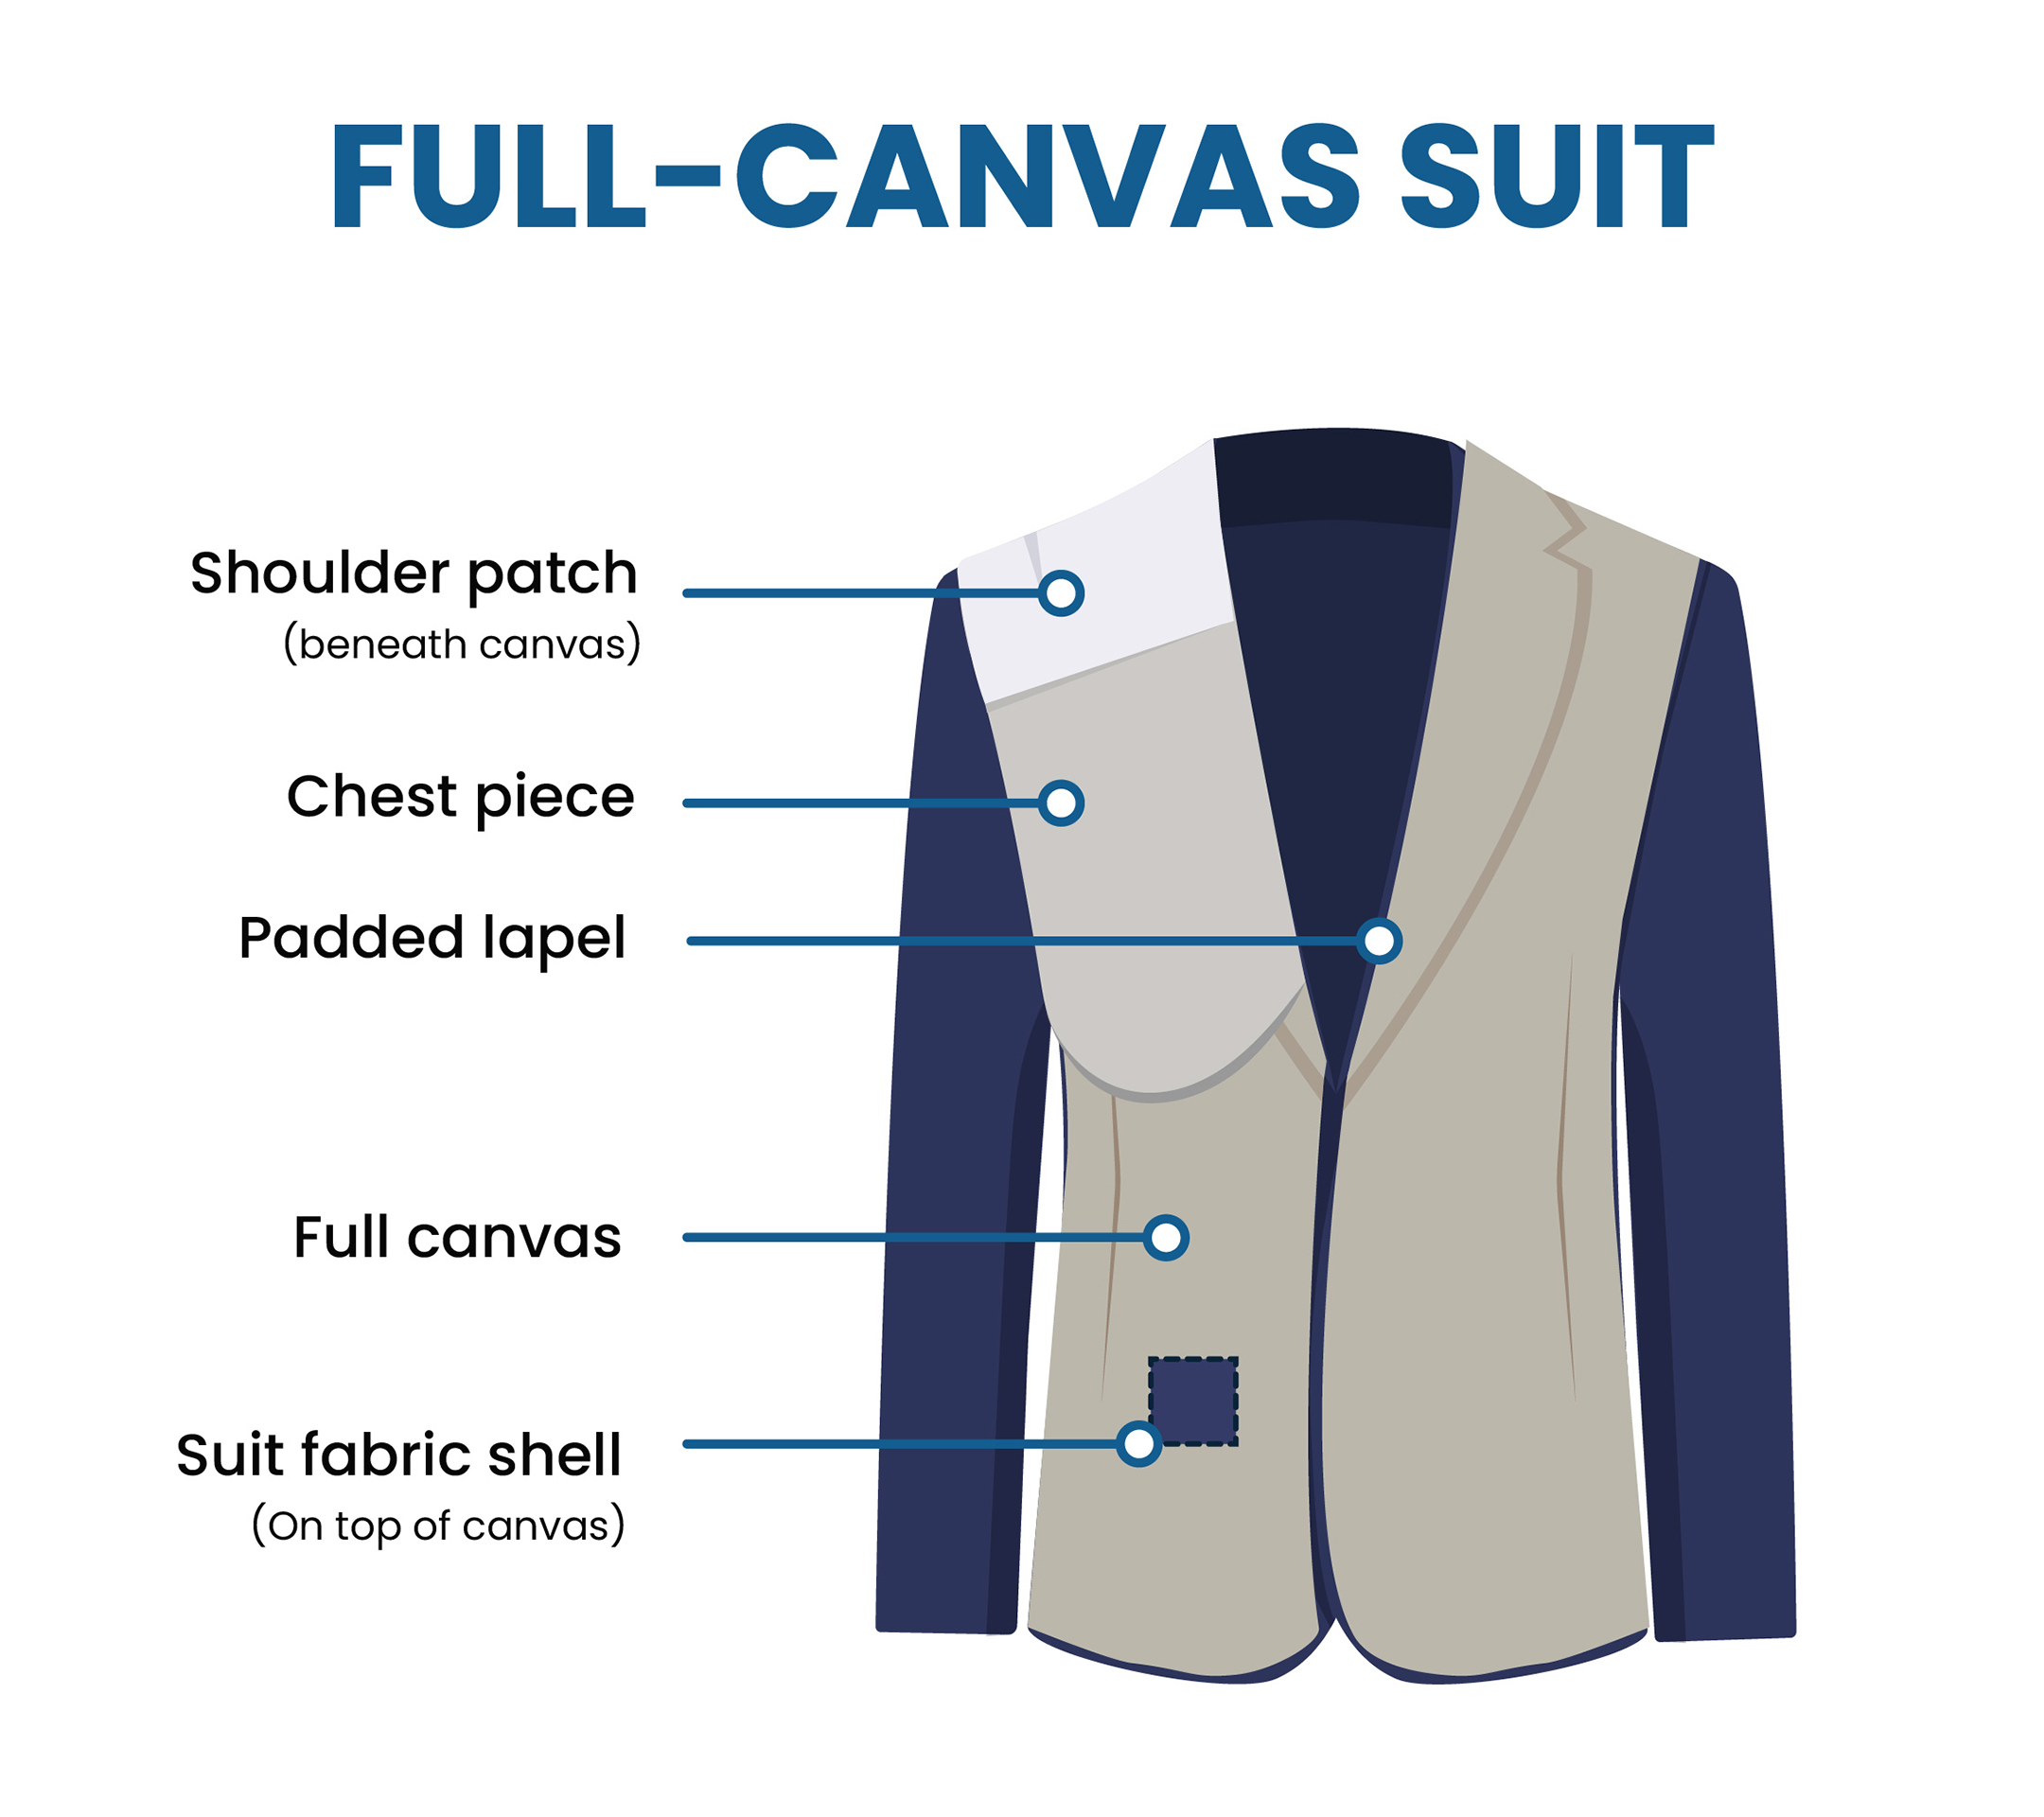 full-canvas suit jacket features